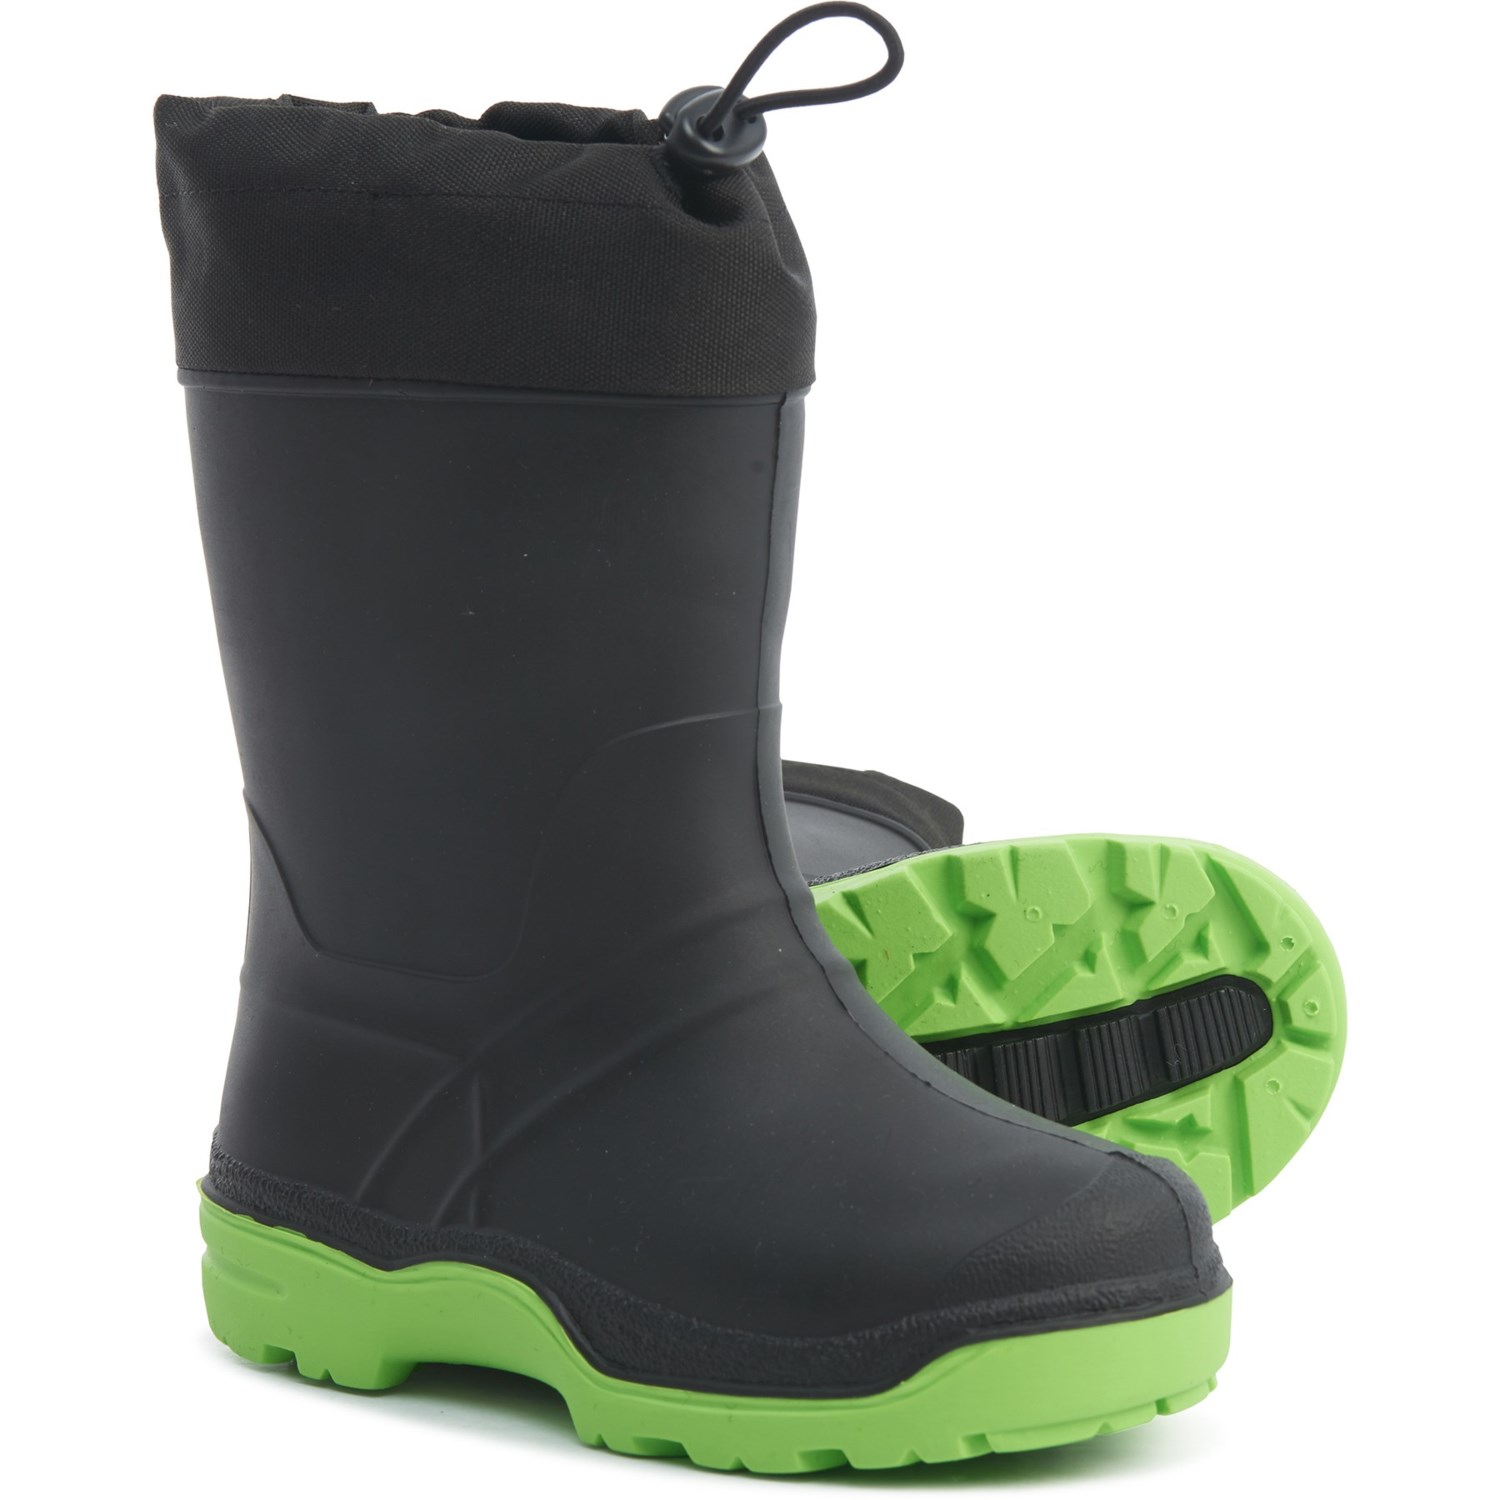 warm snow boots for toddlers